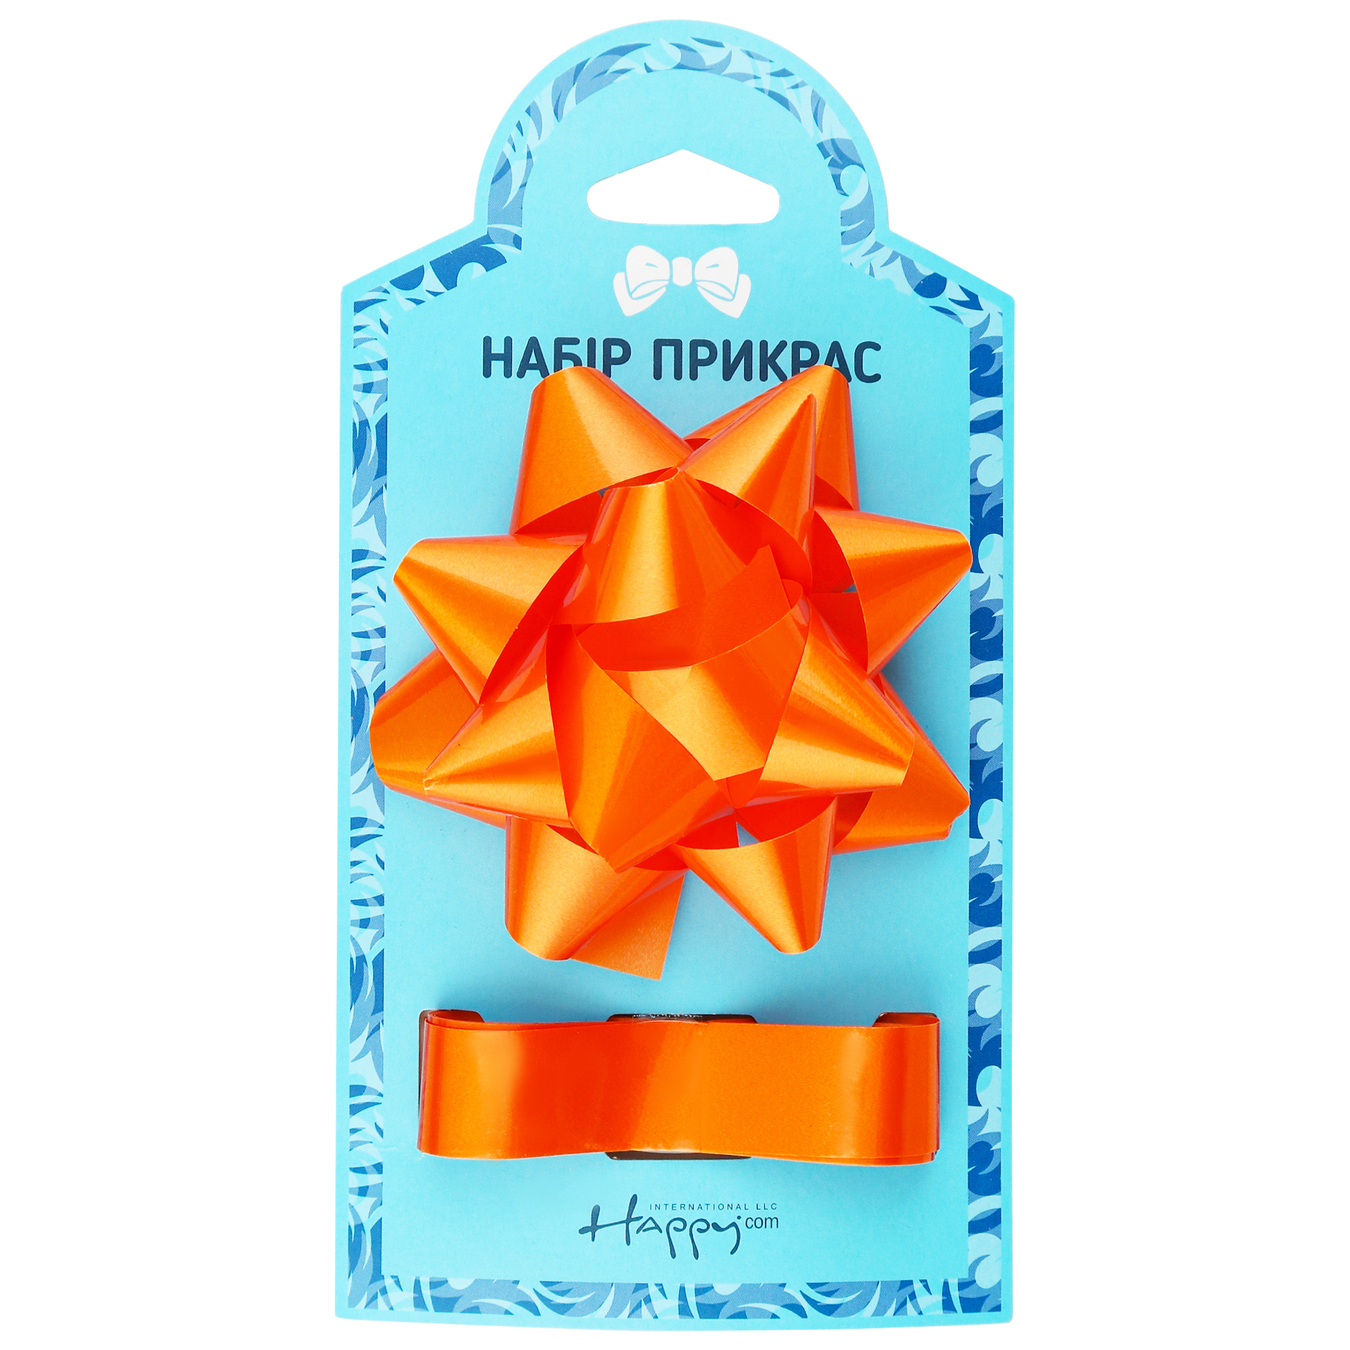 Happycom Eurowrap GalaxyBow decoration for gifts